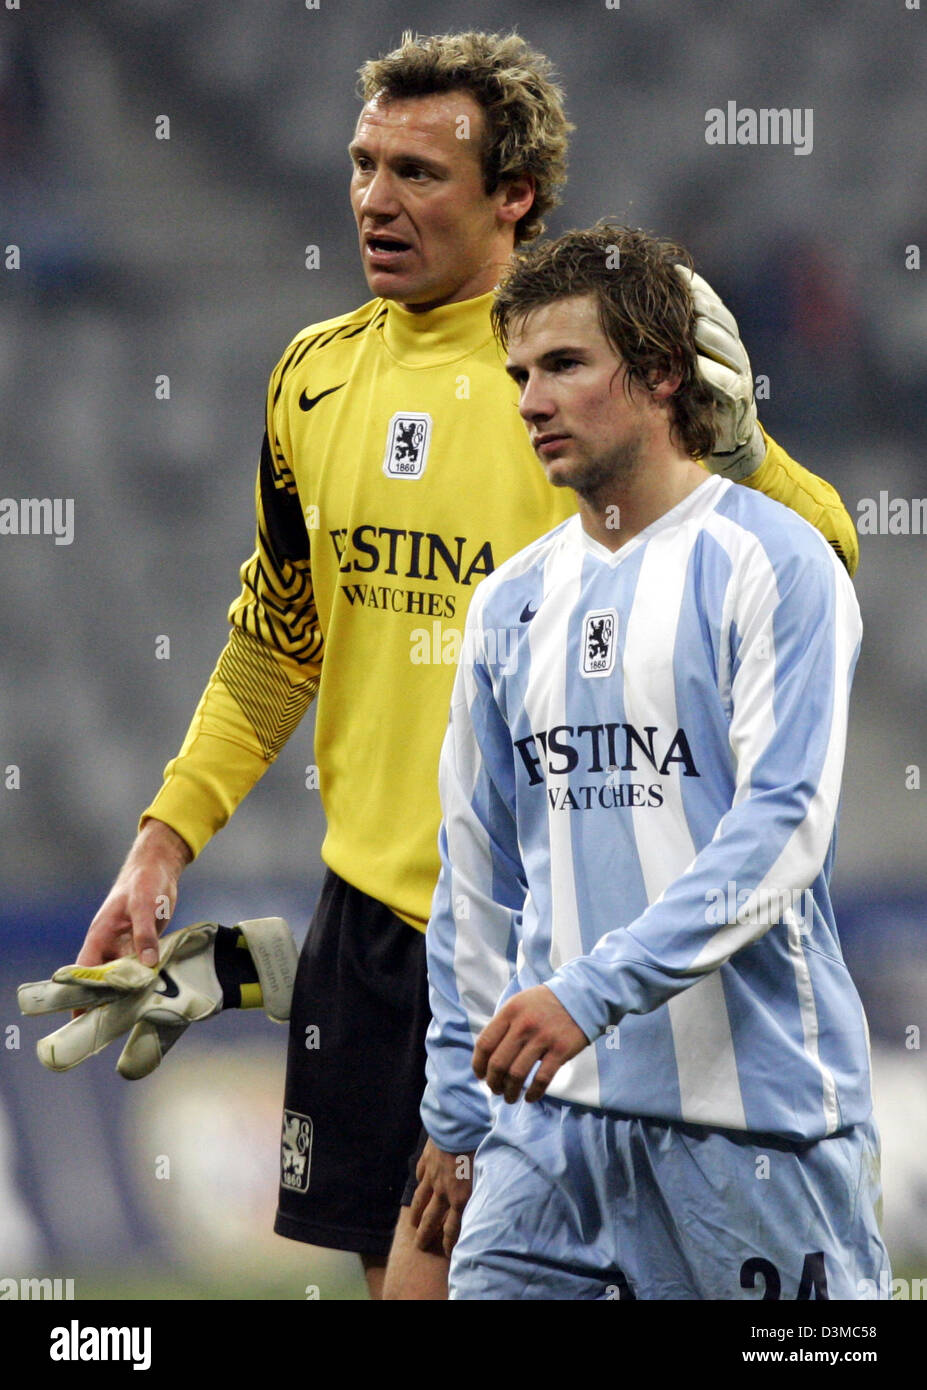 Tsv munich 1860 goalkeeper hi-res stock photography and images - Alamy